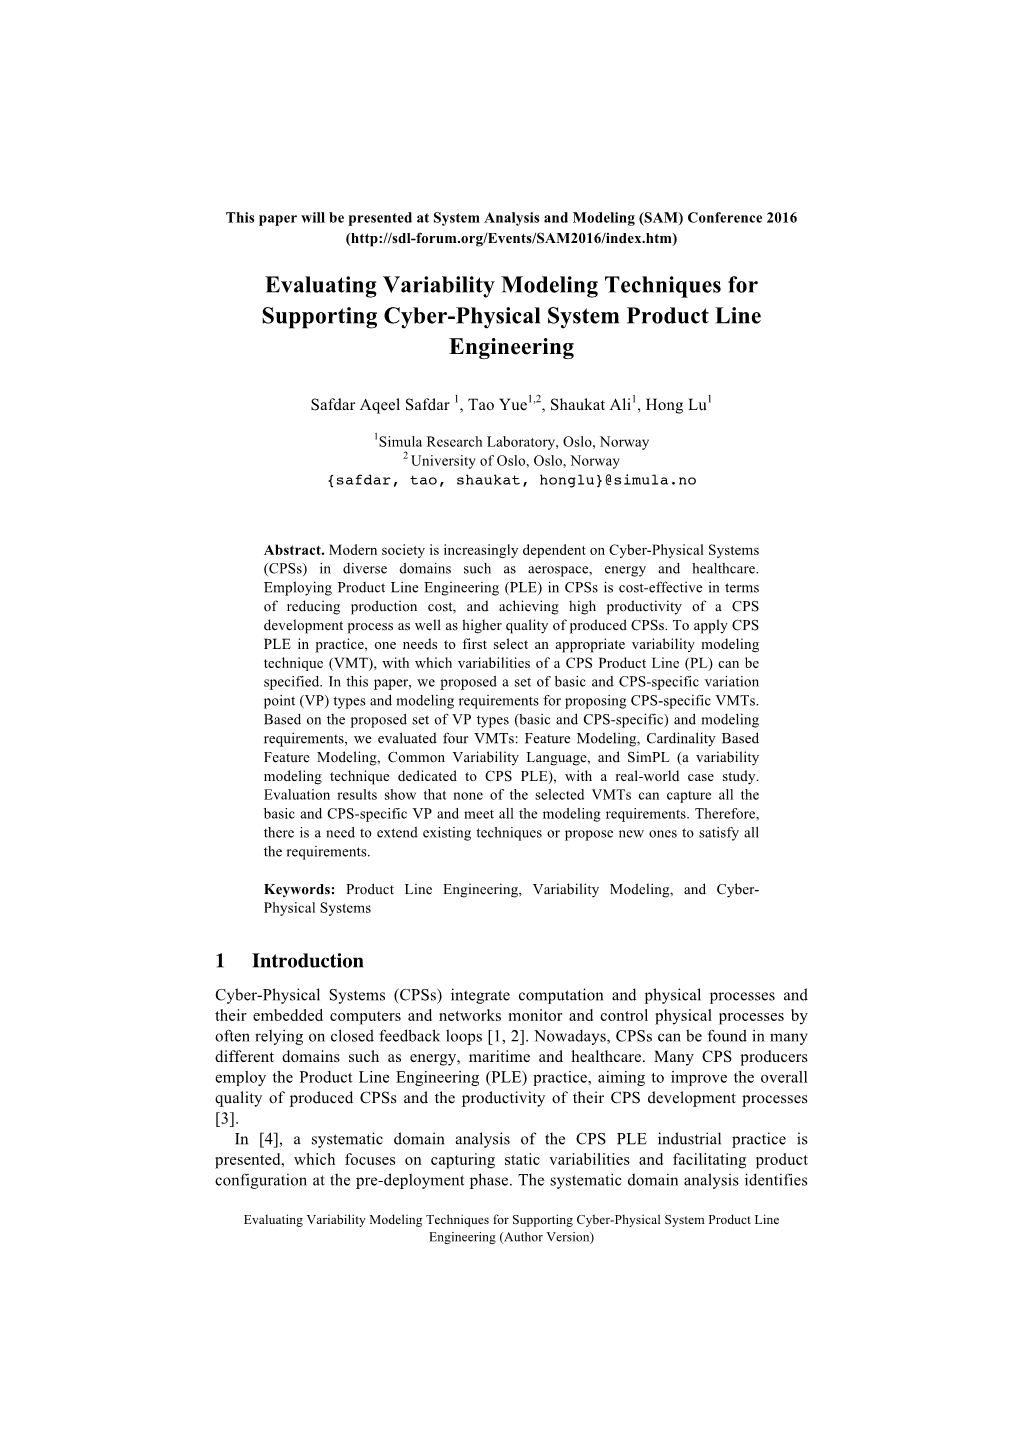 Evaluating Variability Modeling Techniques for Supporting Cyber-Physical System Product Line Engineering